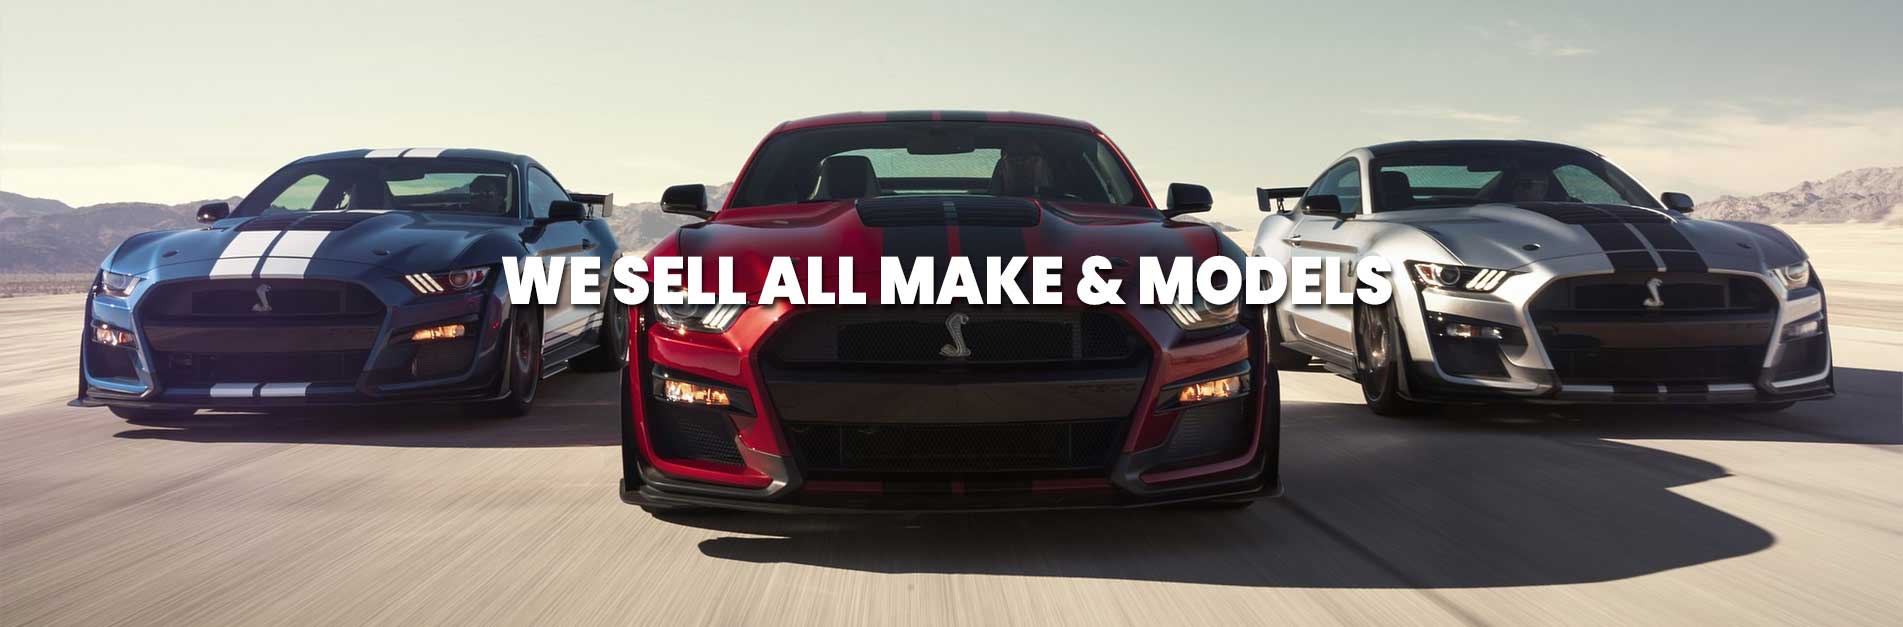 Used cars for sale in Brewer | Ball Motorsports LLC. Brewer Maine